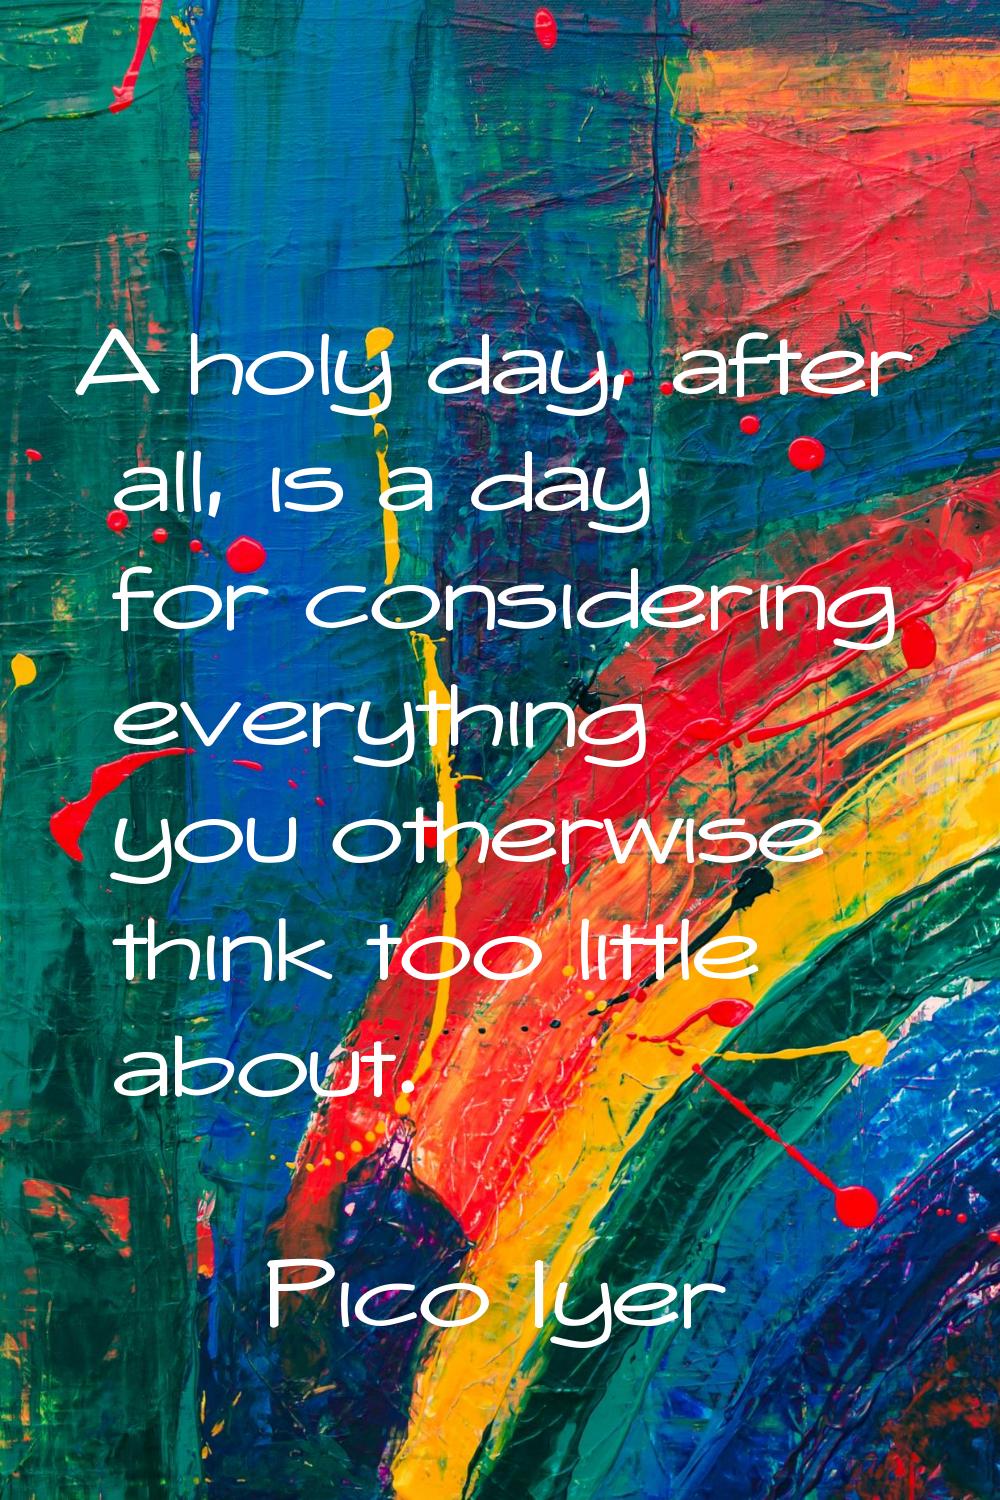 A holy day, after all, is a day for considering everything you otherwise think too little about.